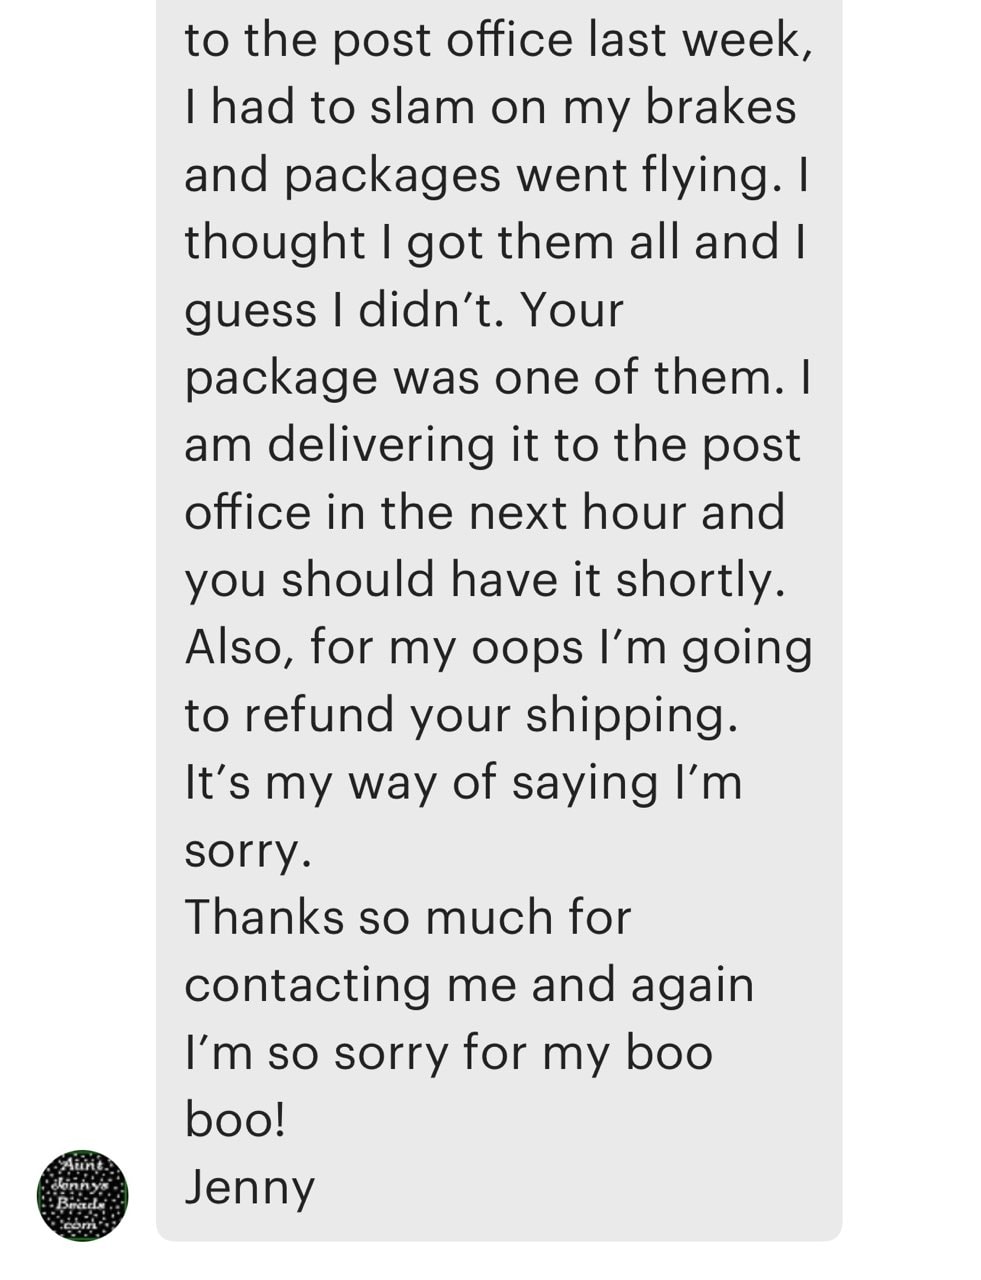 screenshot reading: "to the post office last week and i had to slam on my brakes and packages went flying. I thought I got them all but i guess I didn't. Your packages was one of them. I am delivering it to the post office in the next hour and you should have it shortly. Also, for my oops I'm going to refund your shipping. It's my way of saying I'm sorry. Thanks so much for contacting me and again I'm so sorry for my boo boo! Jenny.